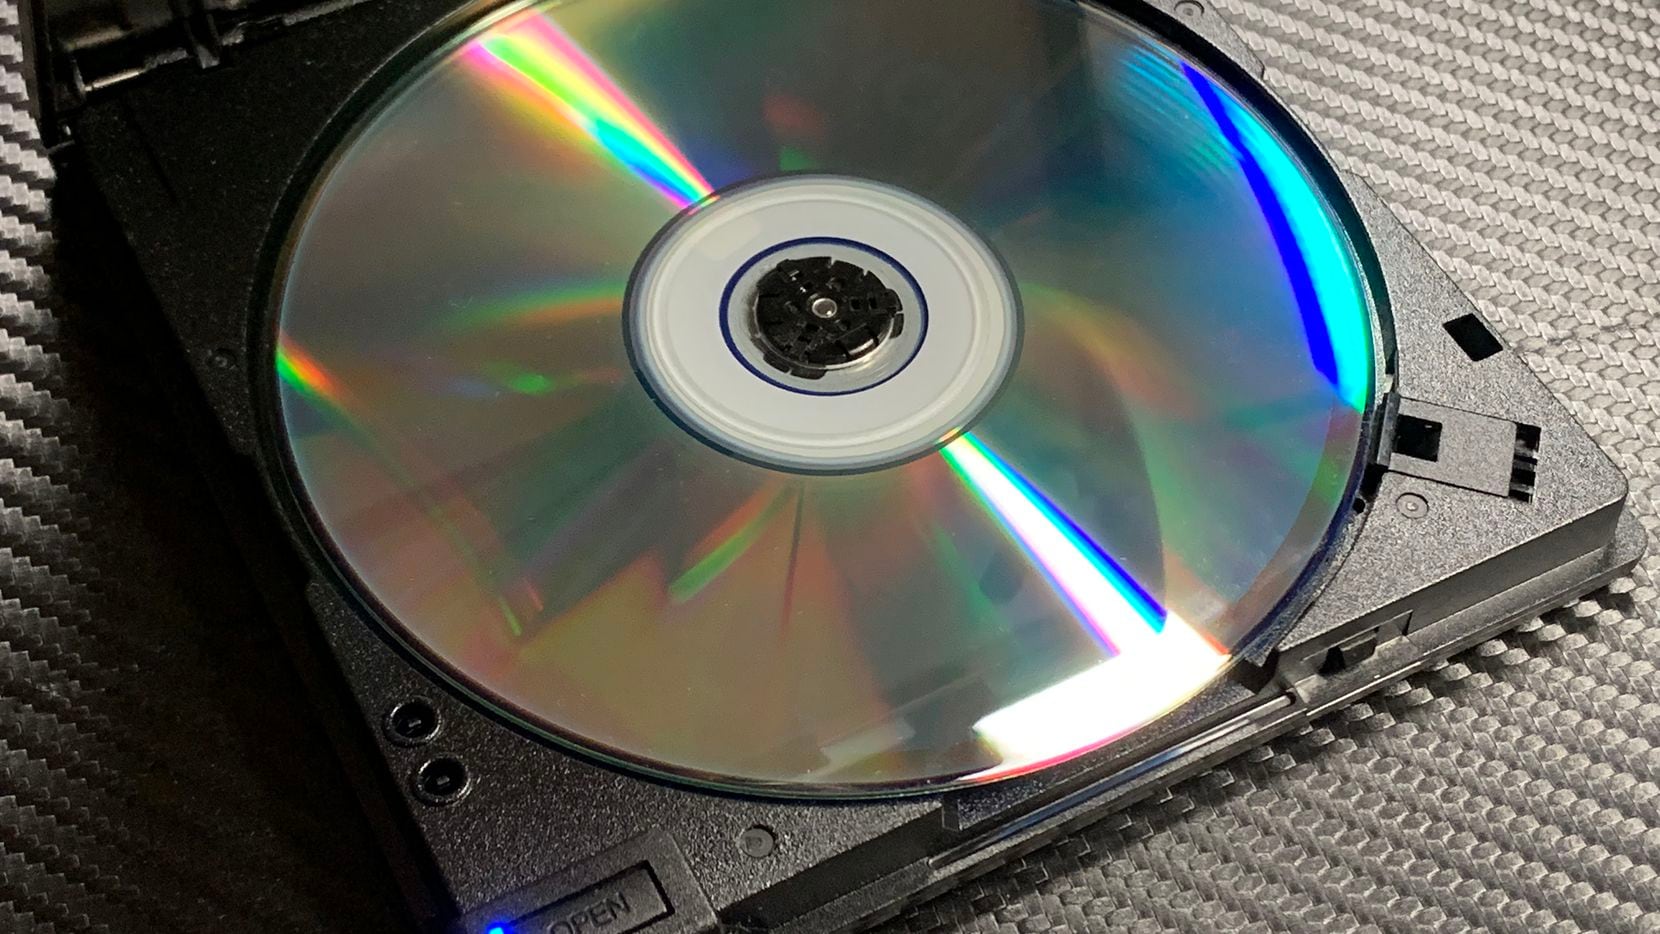 how to copy a cd to another cd windows 10